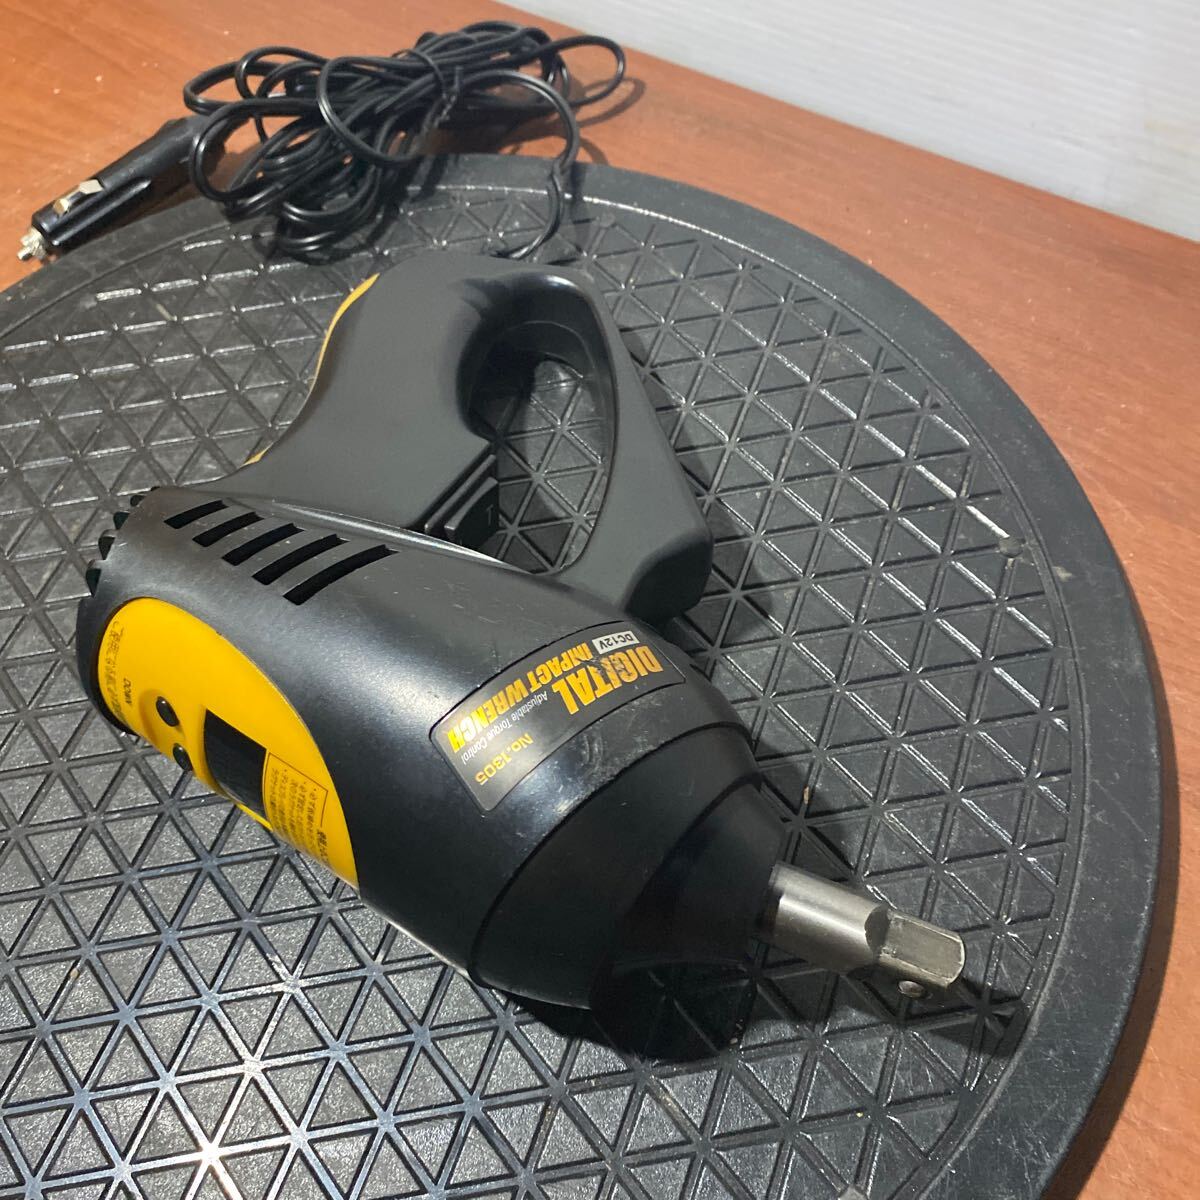  large . industry impact wrench 1305 present condition goods 